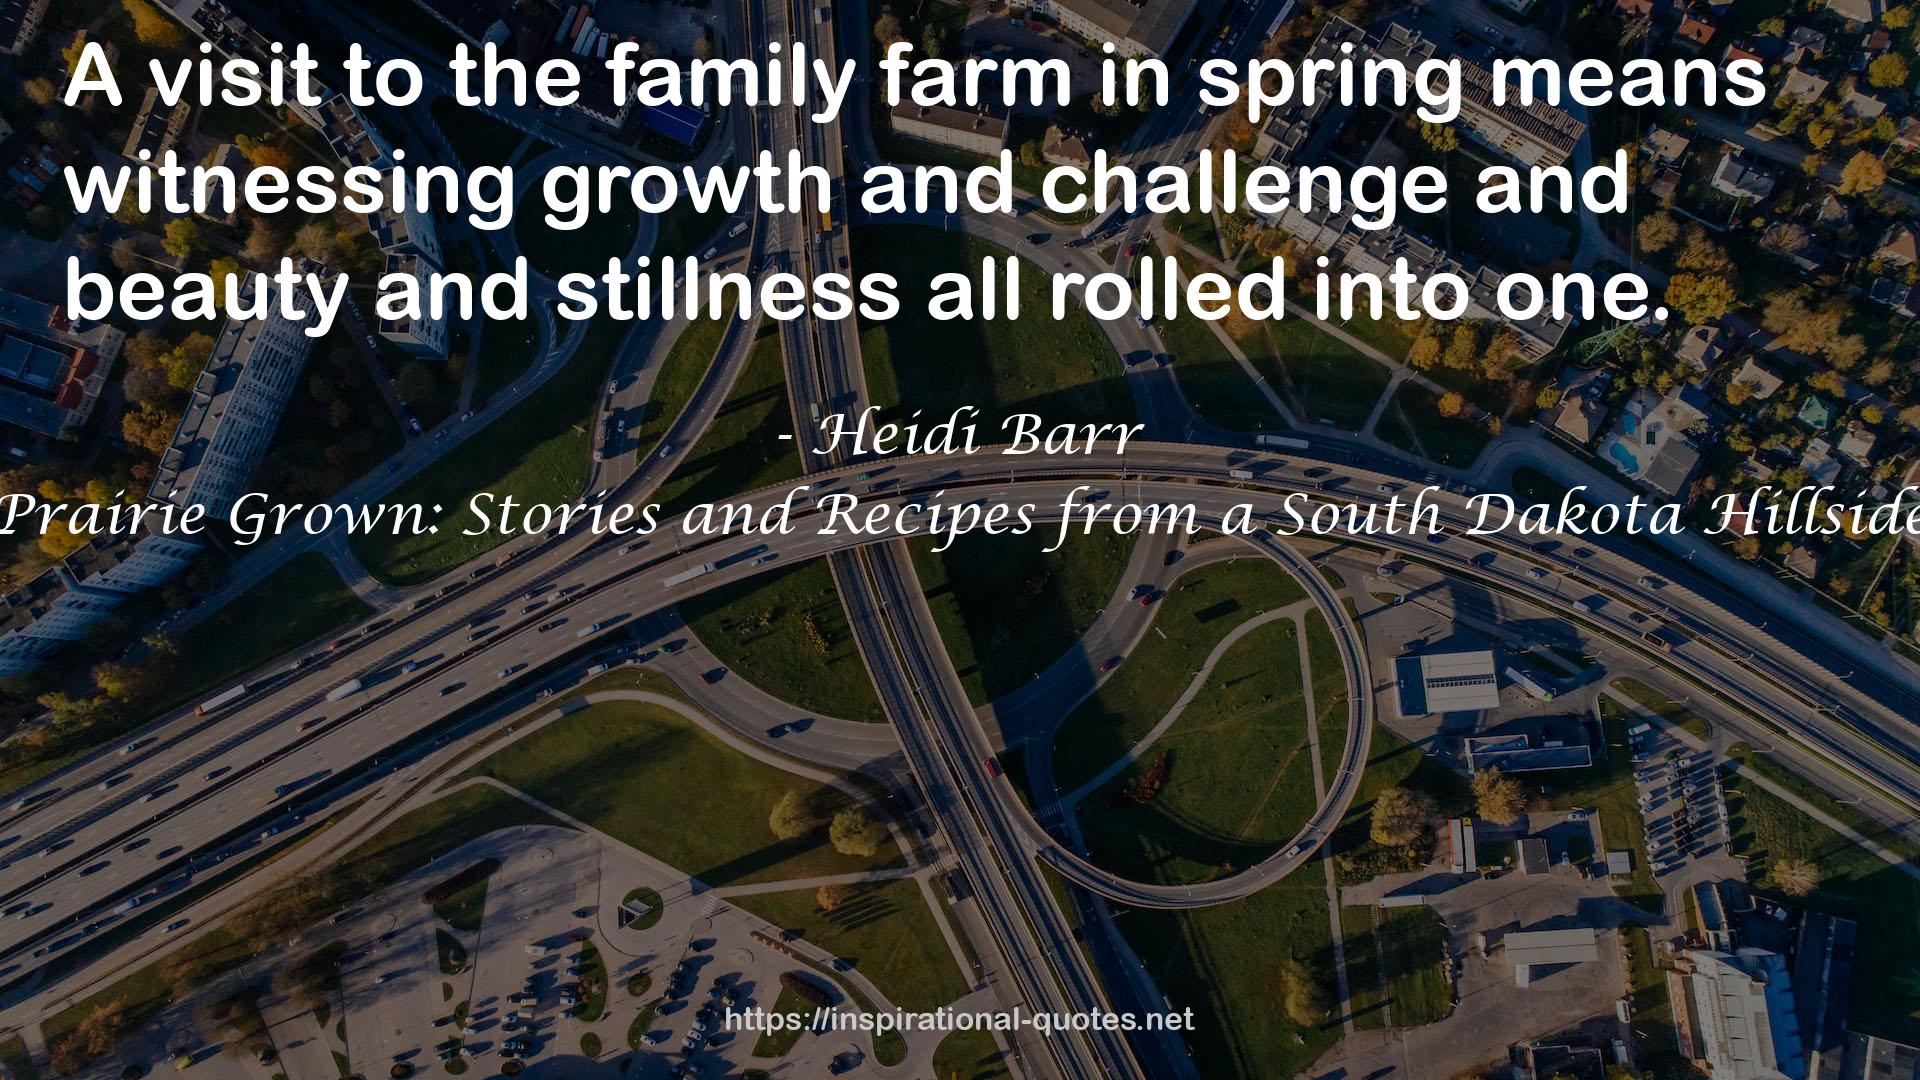 Prairie Grown: Stories and Recipes from a South Dakota Hillside QUOTES